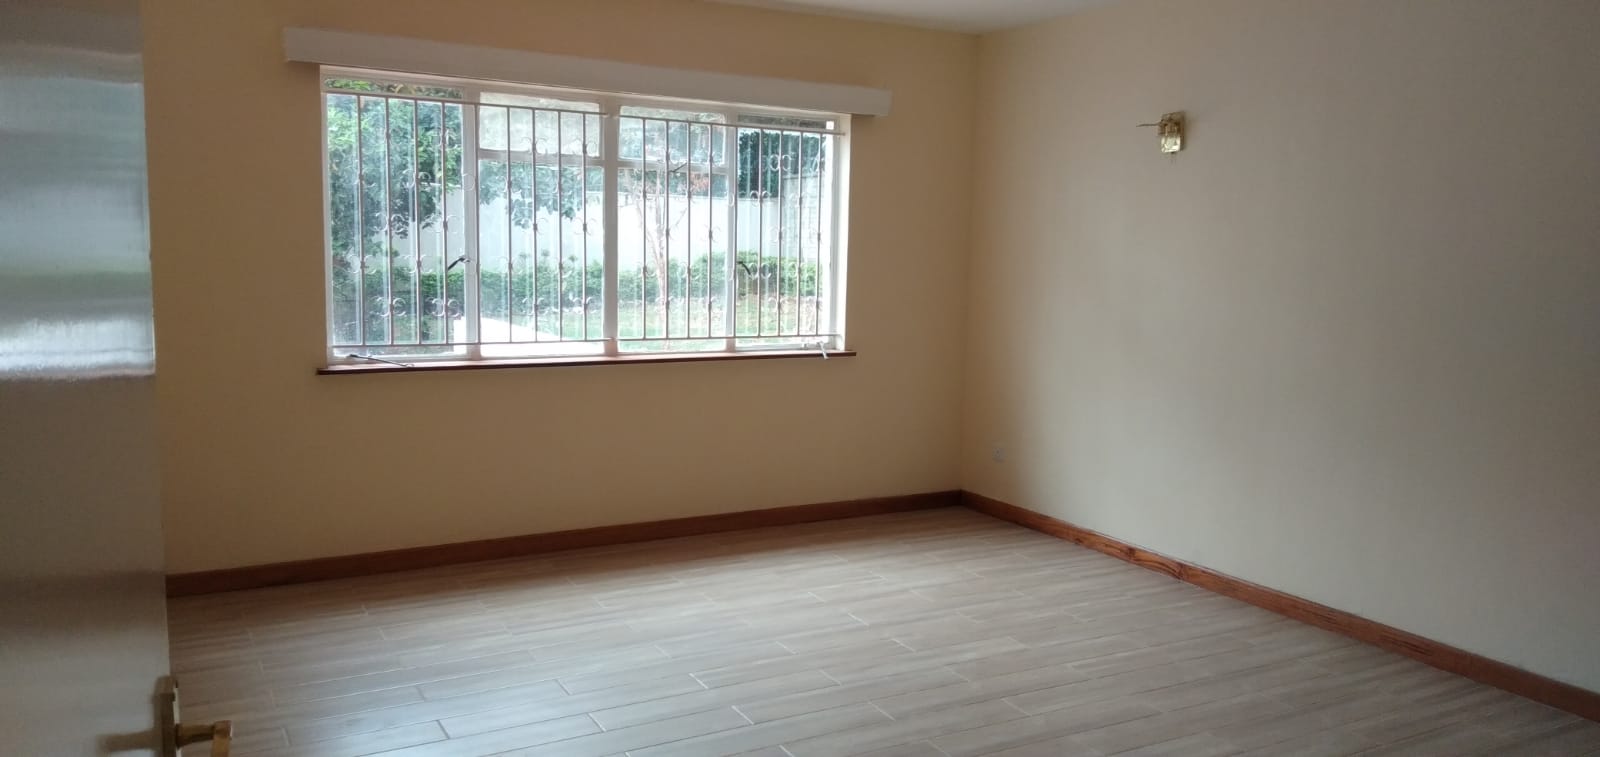 Lovely 5 Bedroom Villa for Rent in Lower Kabete, along Ngecha Road, from ksh450k per Month with exciting Amenities32